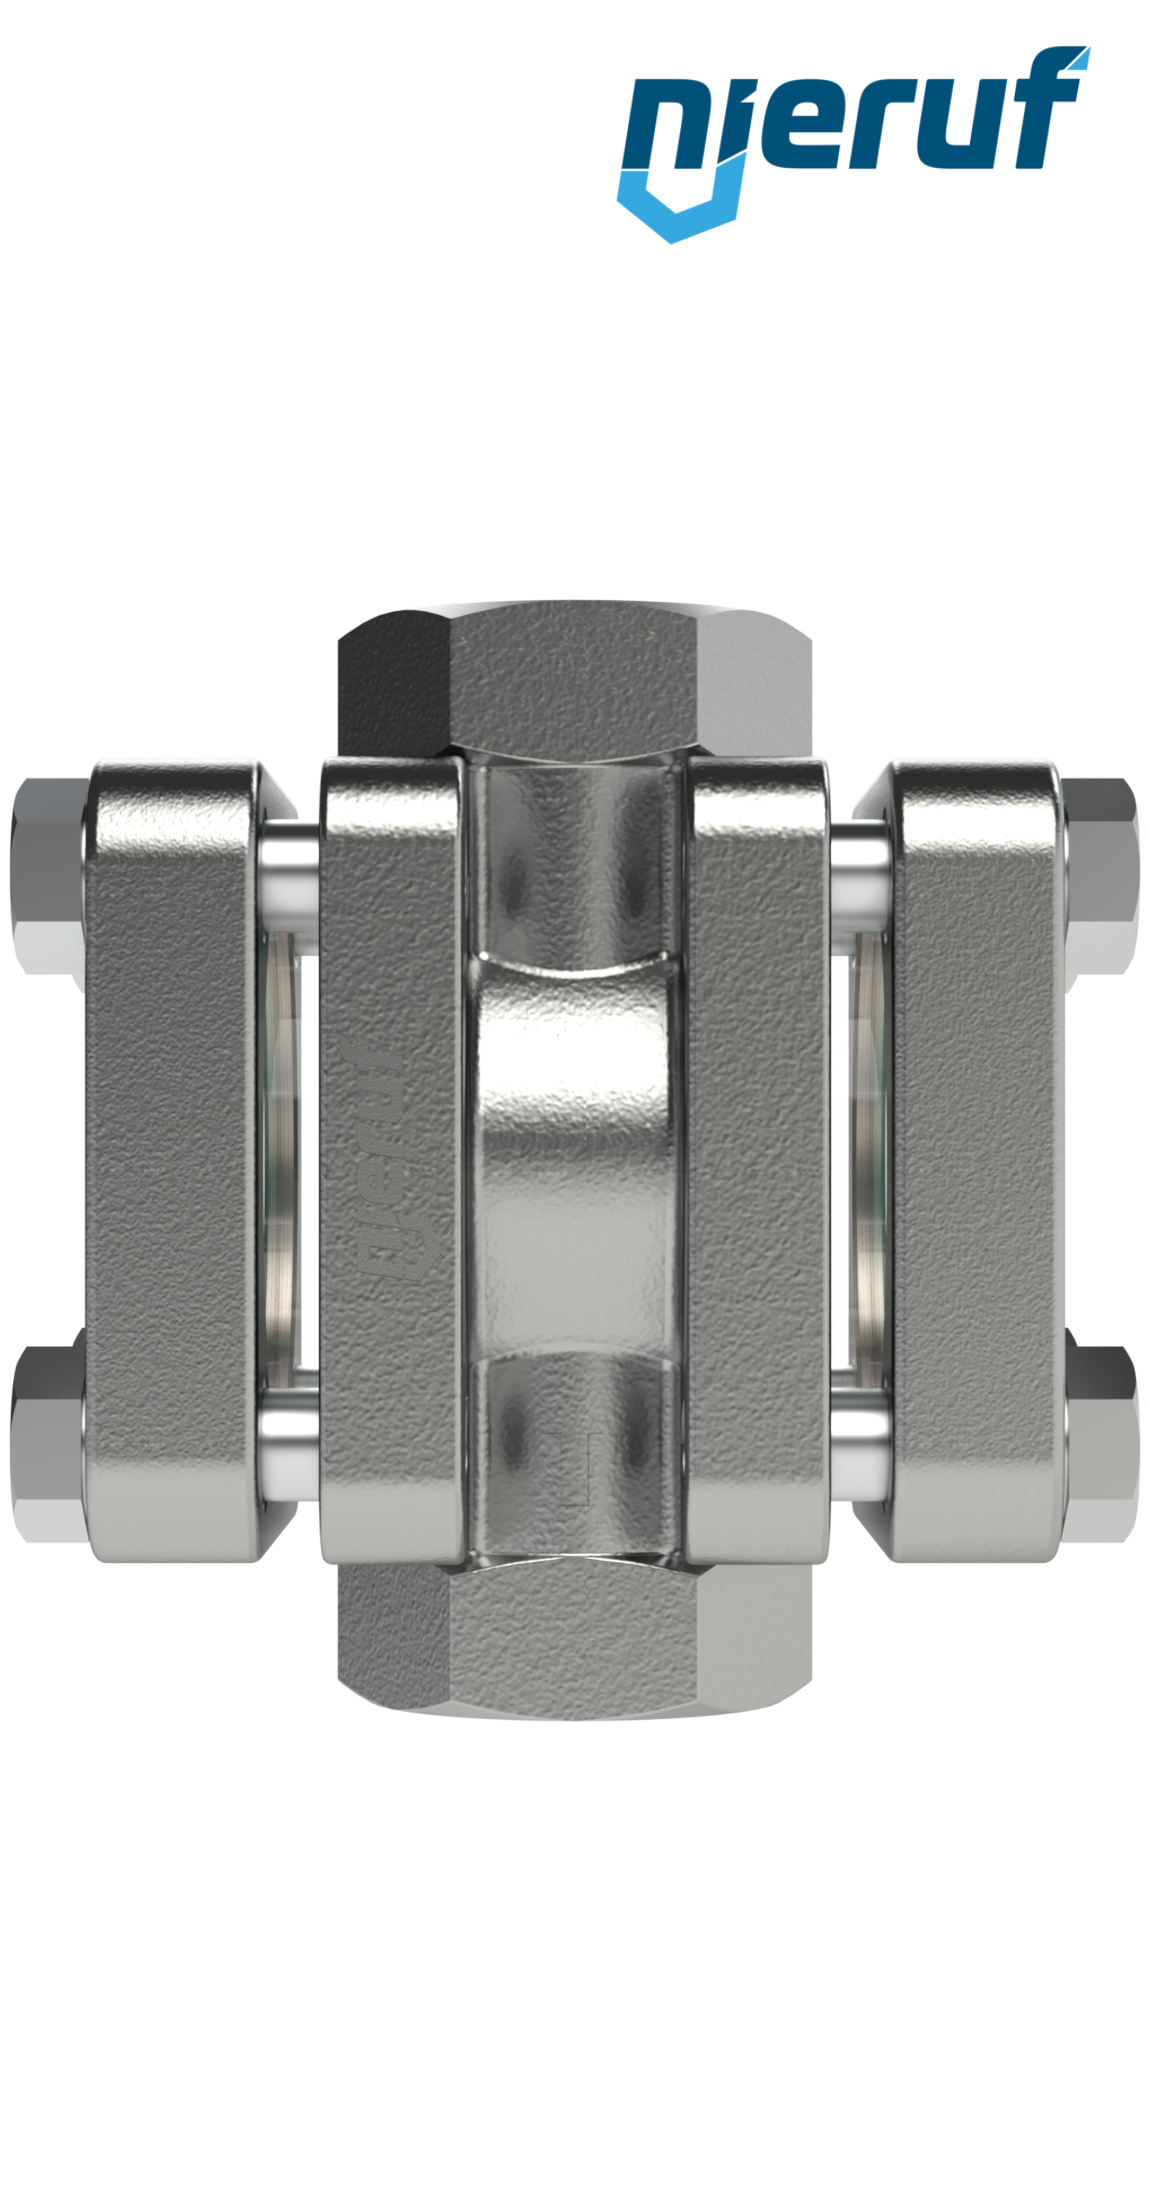 flow-through sight flow indicator DN20 - 3/4" Inch stainless steel borosilicate glass design with disc